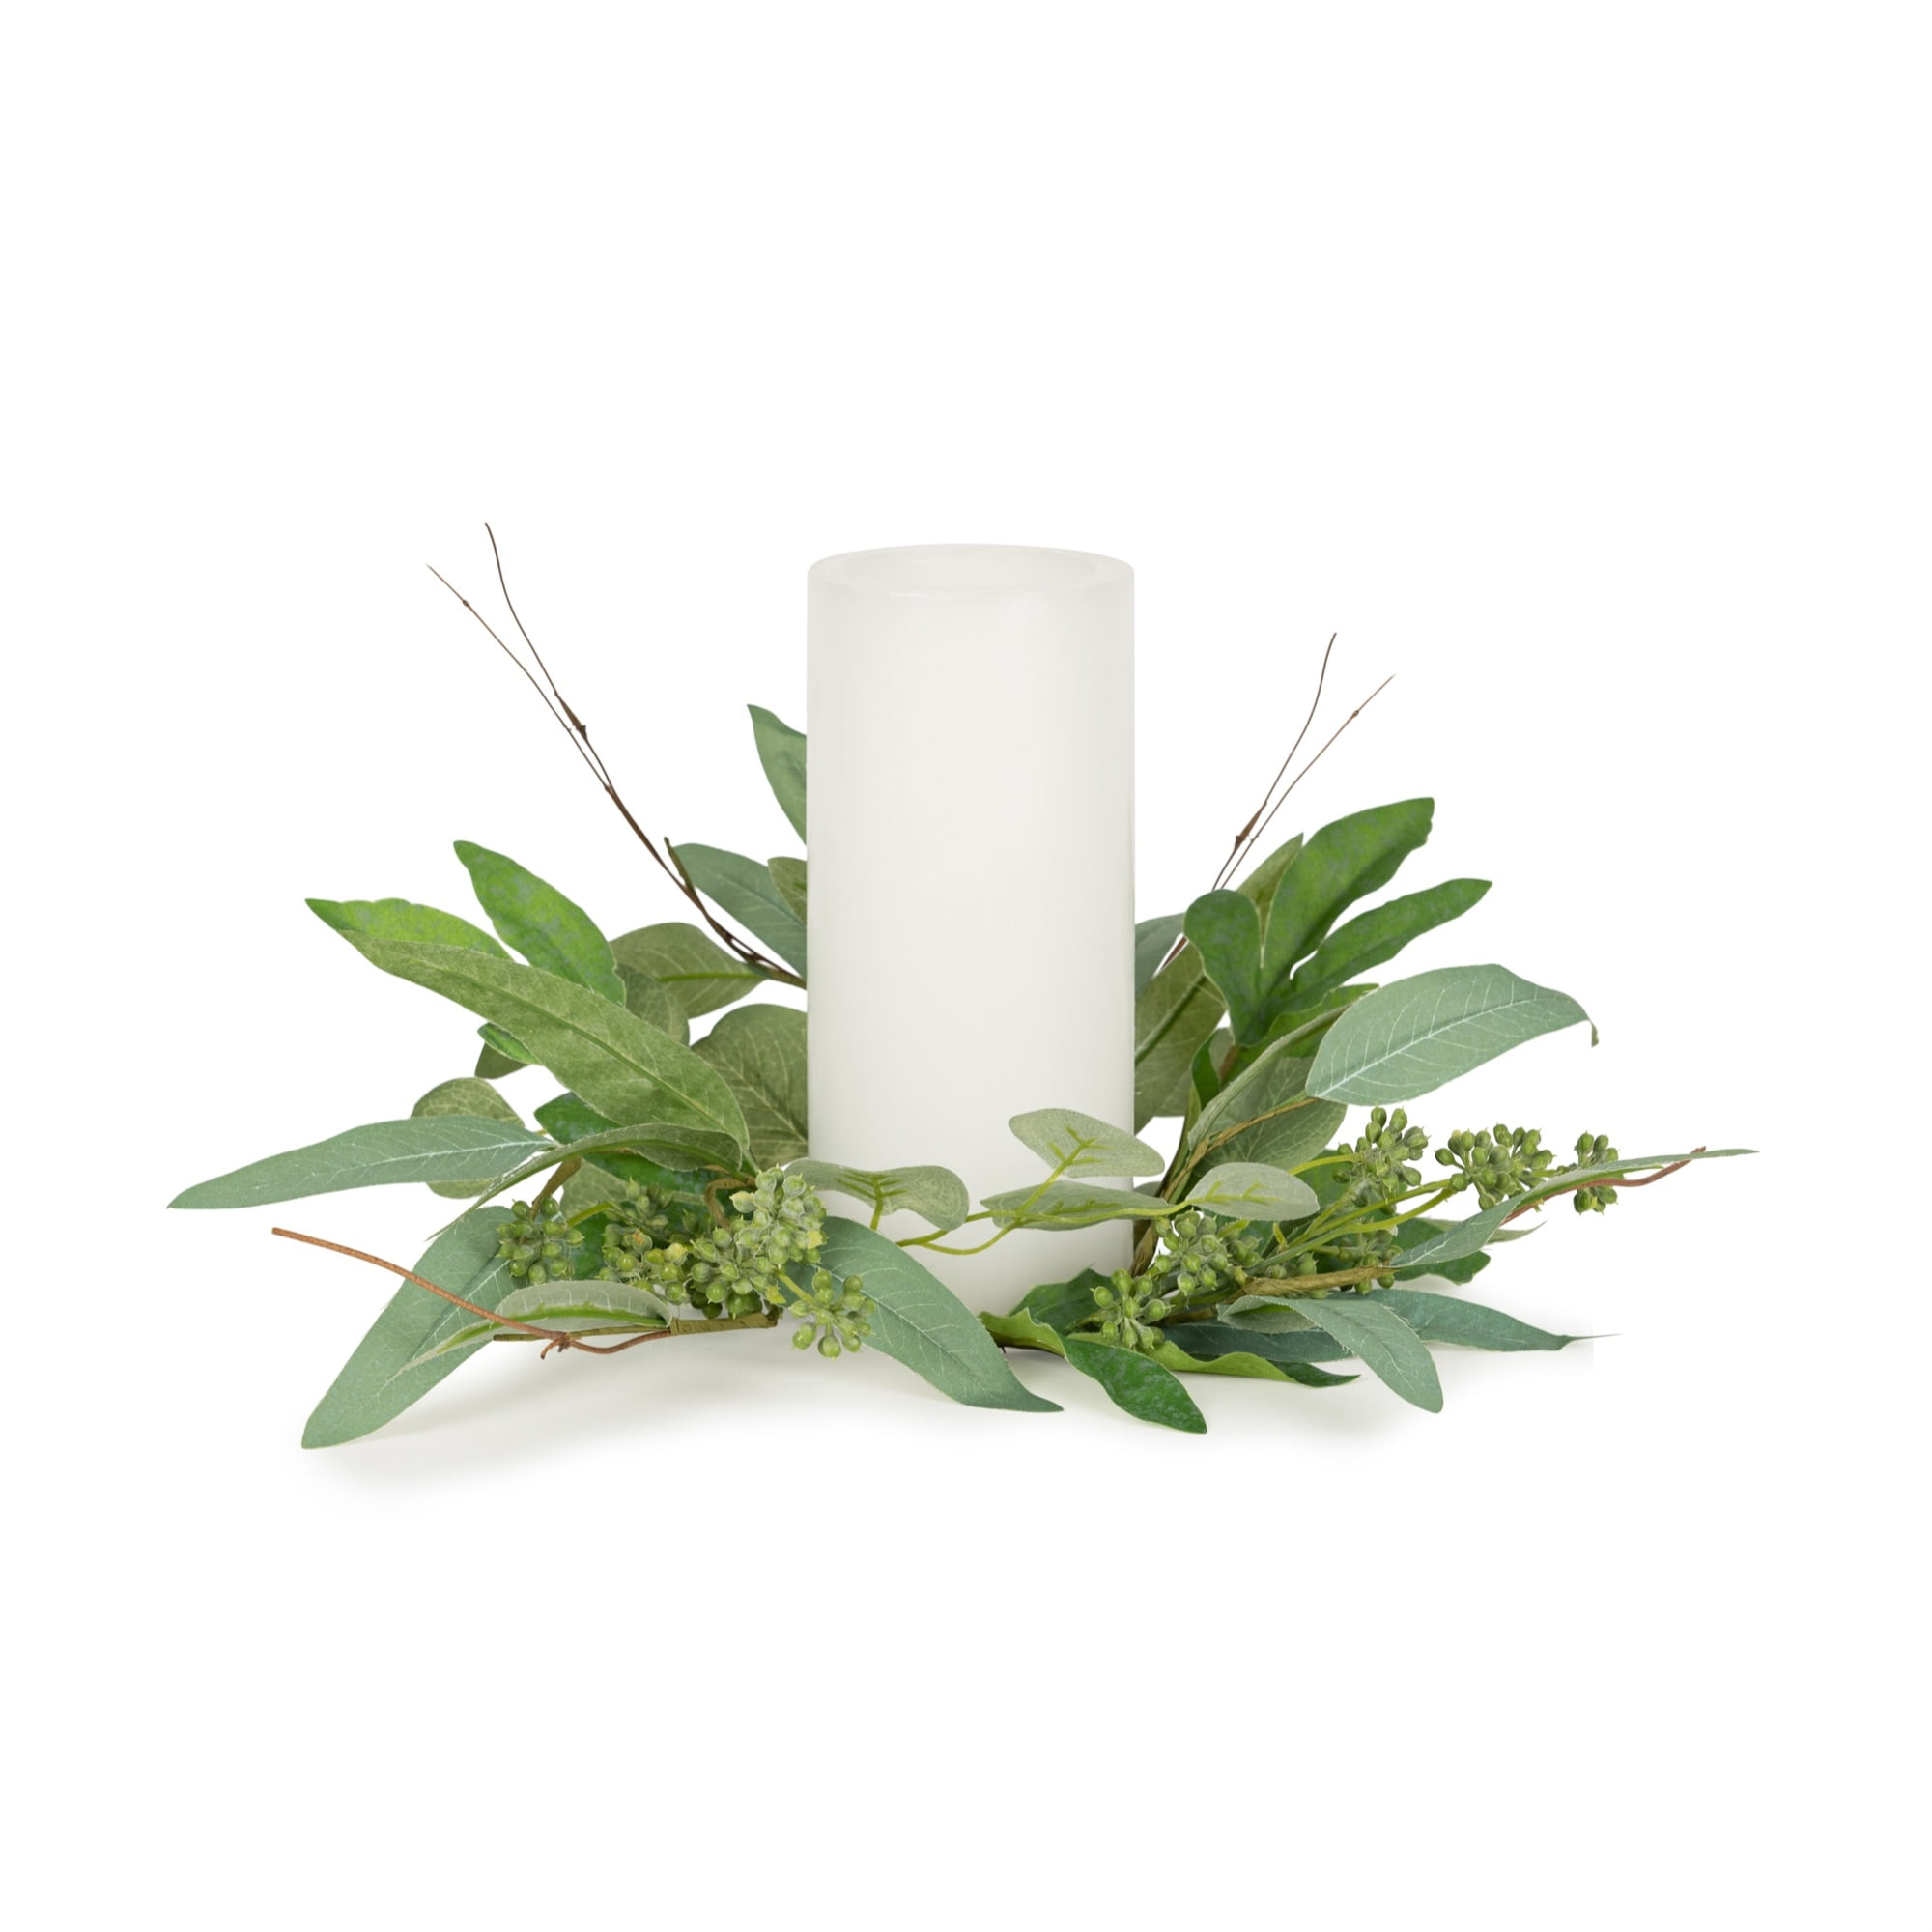 Mixed Eucalyptus Candle Ring 15"D Fabric (Fits a 4" Candle)